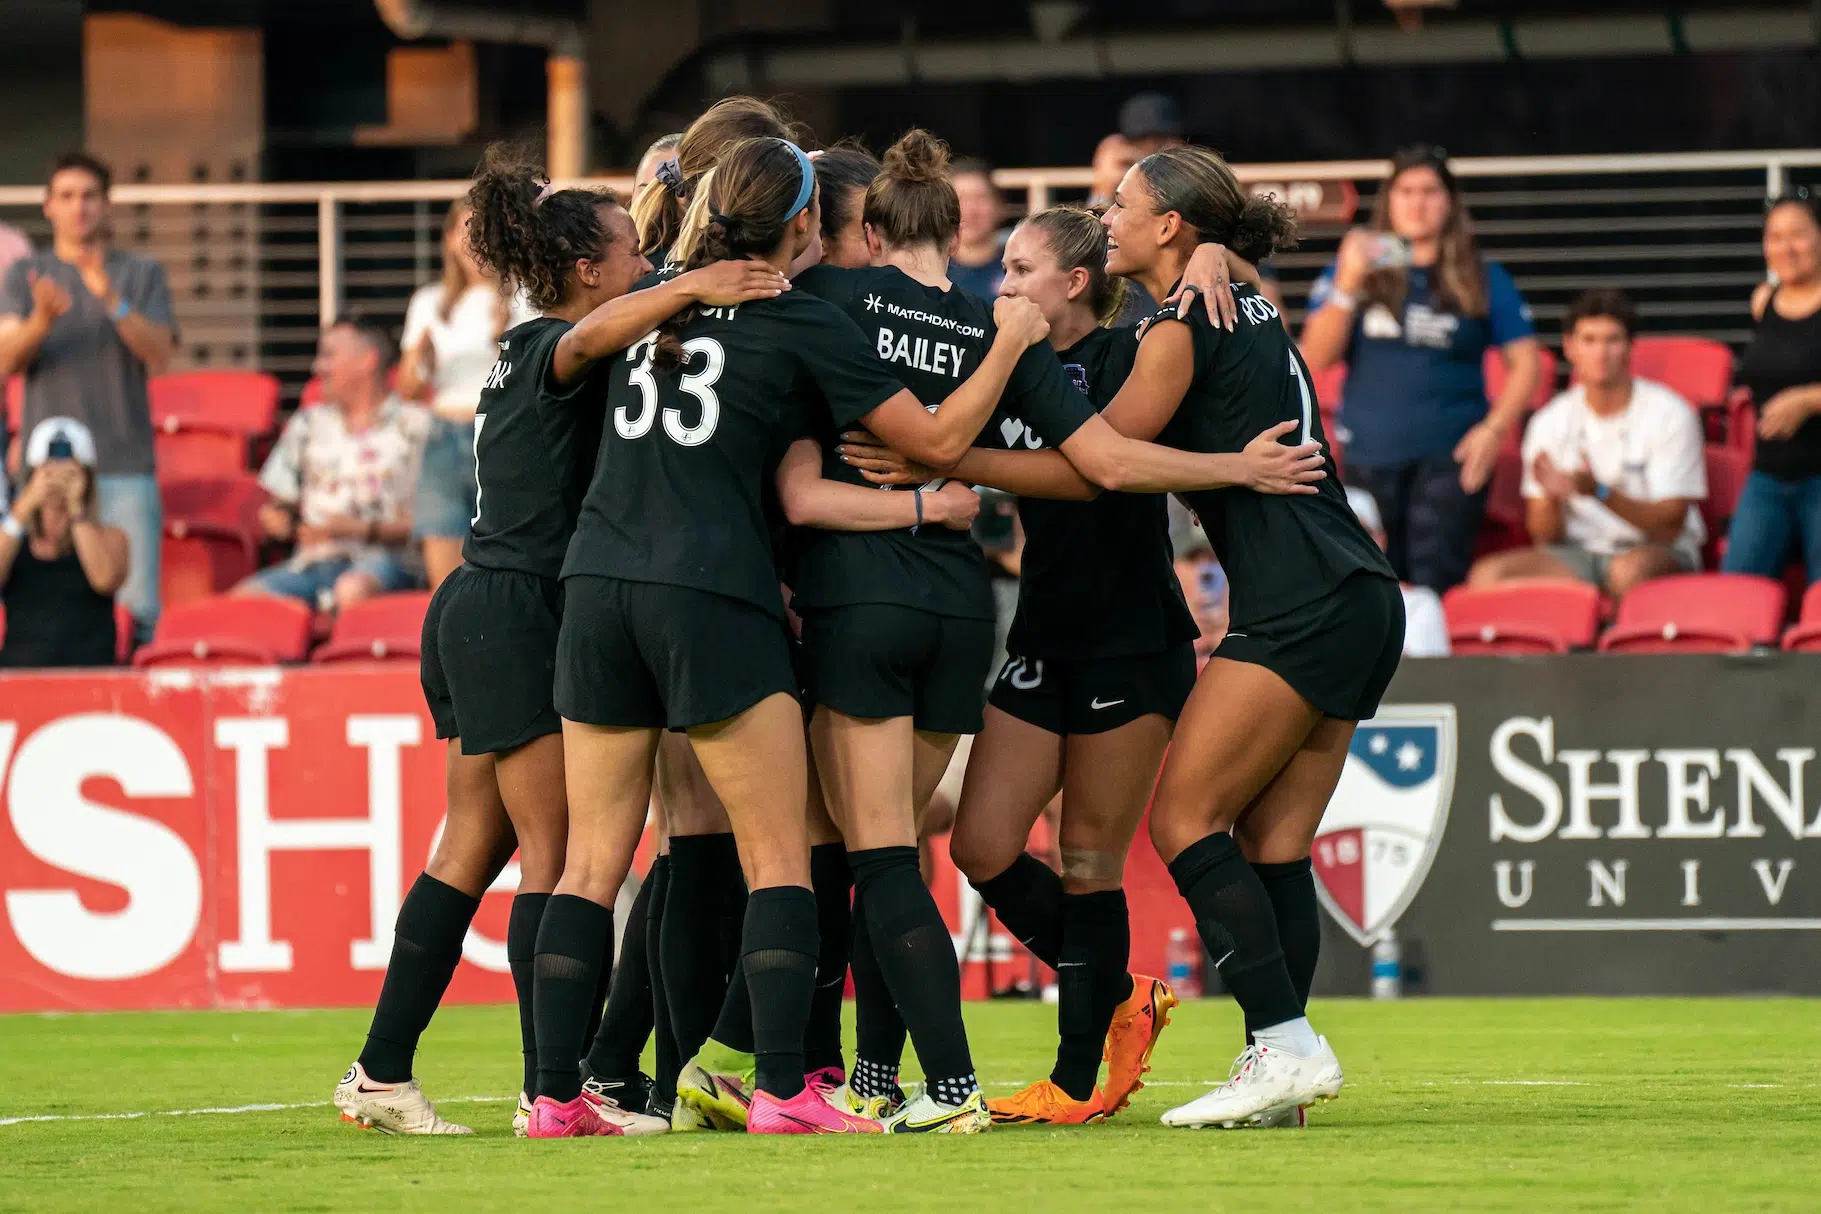 A group of soccer players in all black uniforms form a group hug in celebration of a goal.